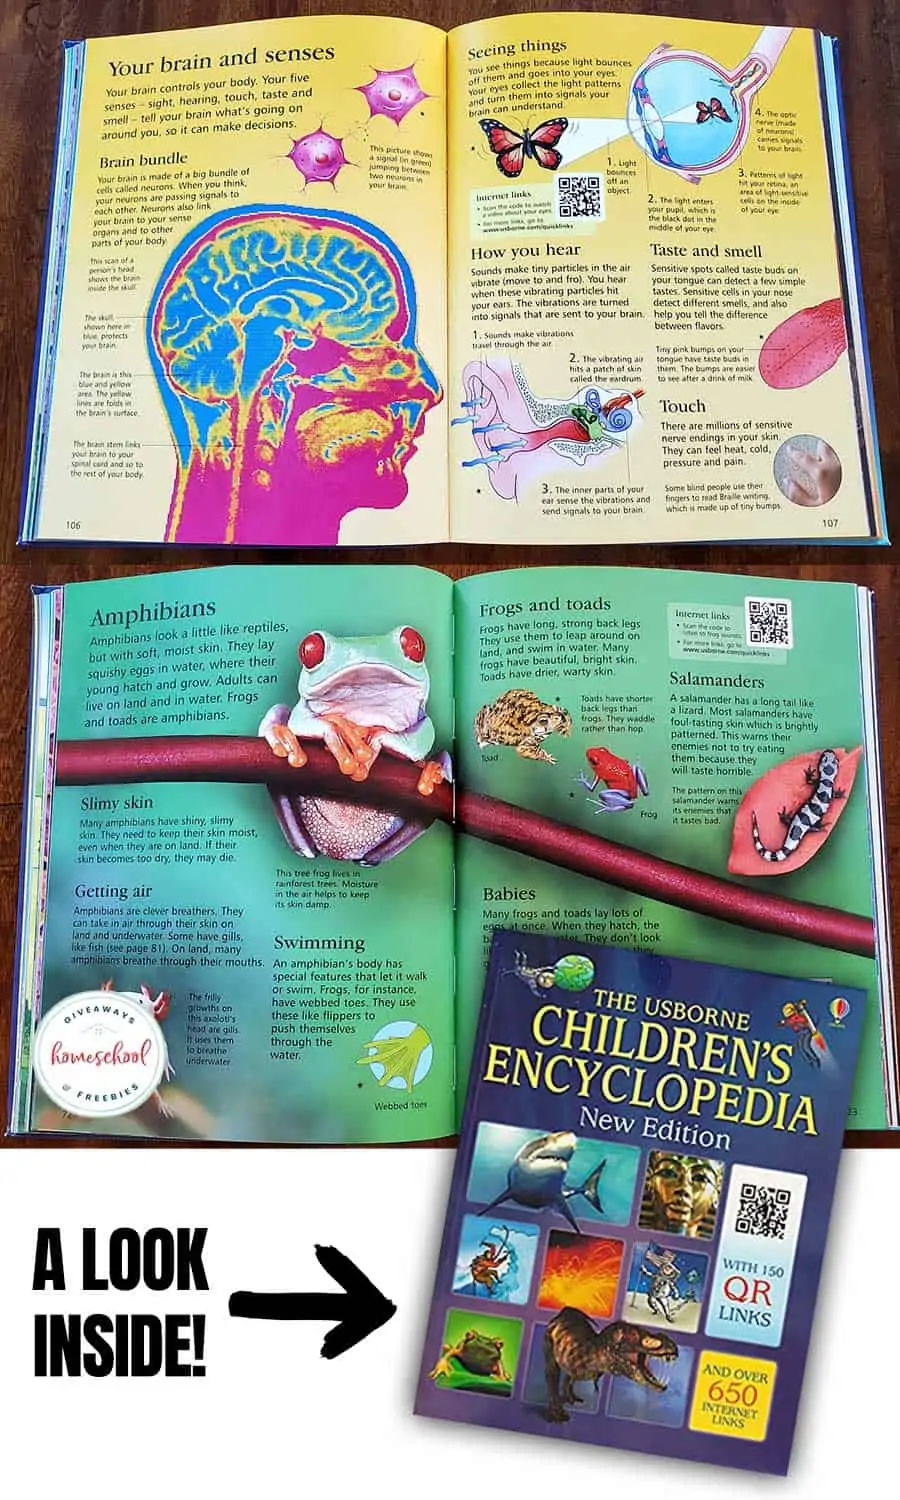 The Usborne Children's Encyclopedia with pictures of the inside of the book.